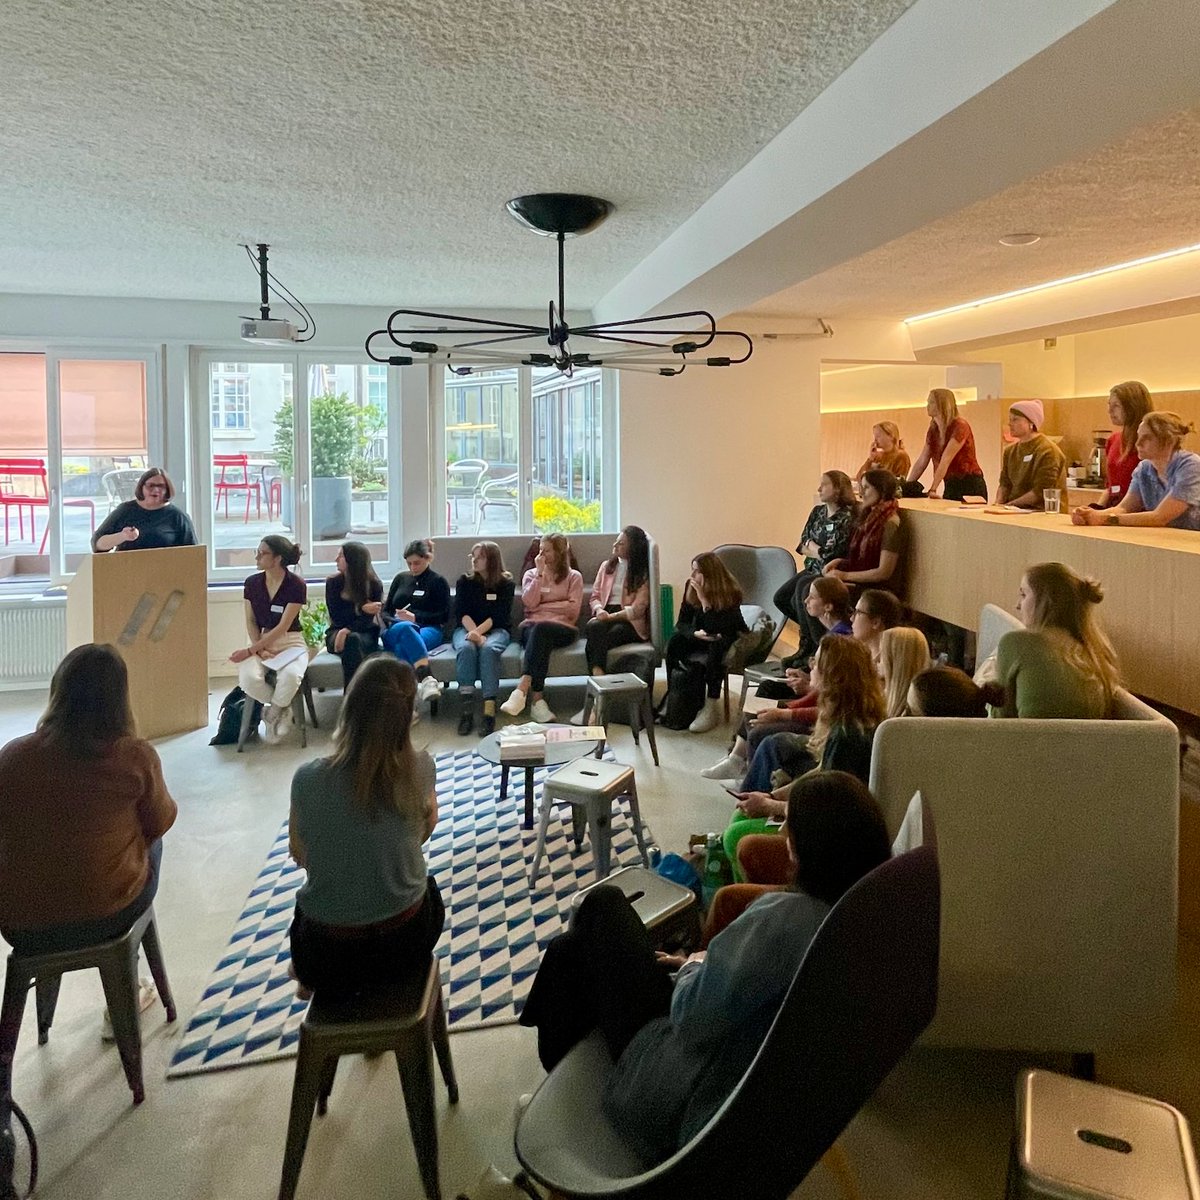 Lots of #inspiring speeches at the #GirlsGettingStarted event in our #Bern office, hosted with @impacthubbern 💪🤩